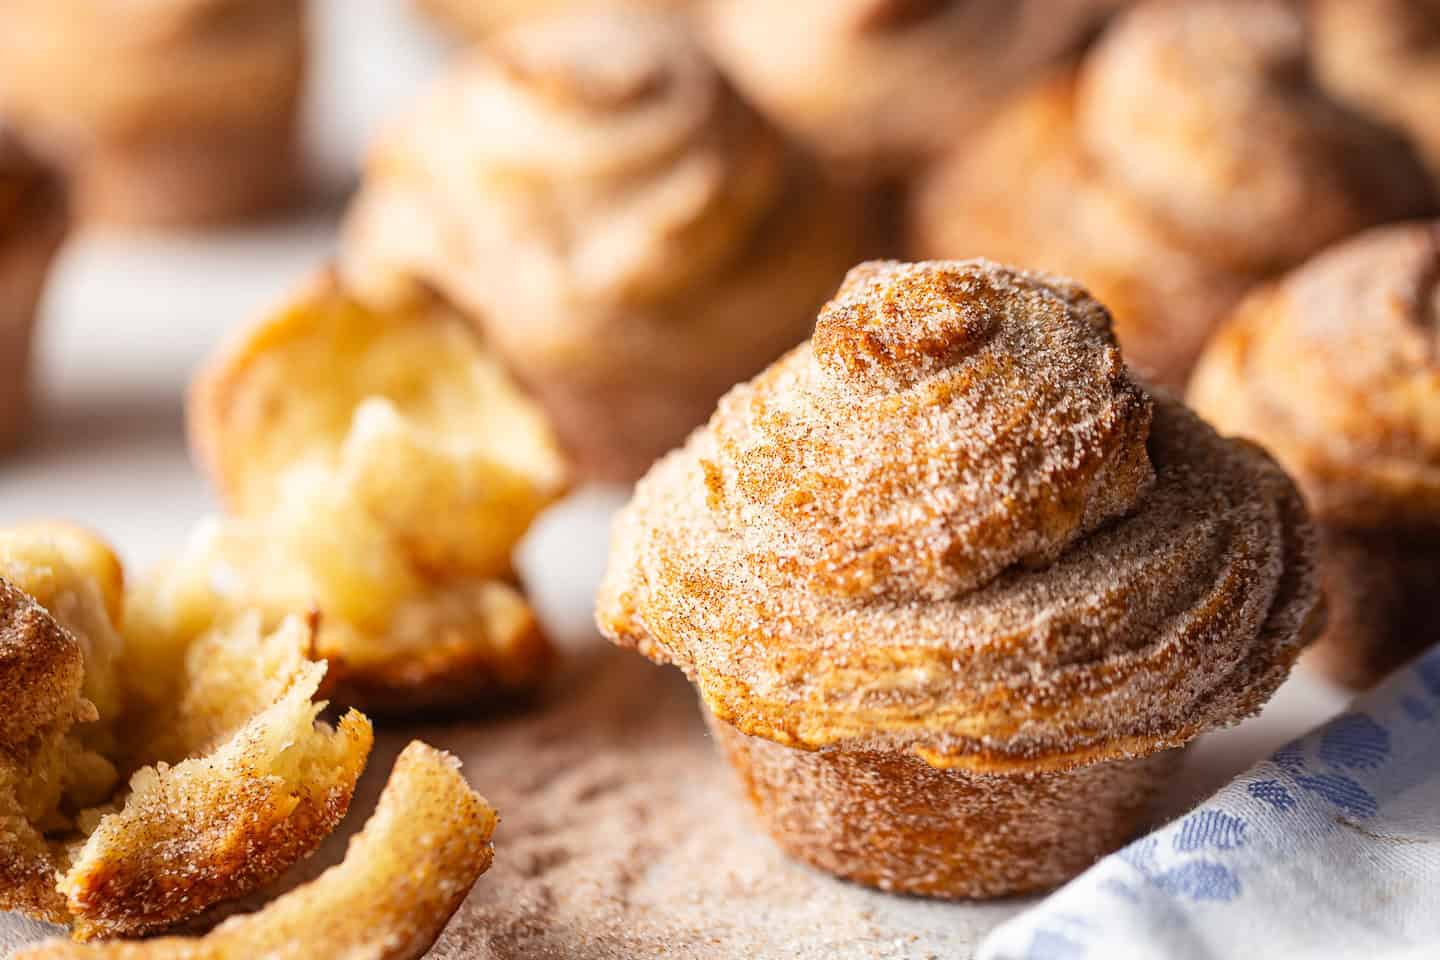 Recipe for cruffins, prepared and displayed on a white background with a periwinkle blue cloth.